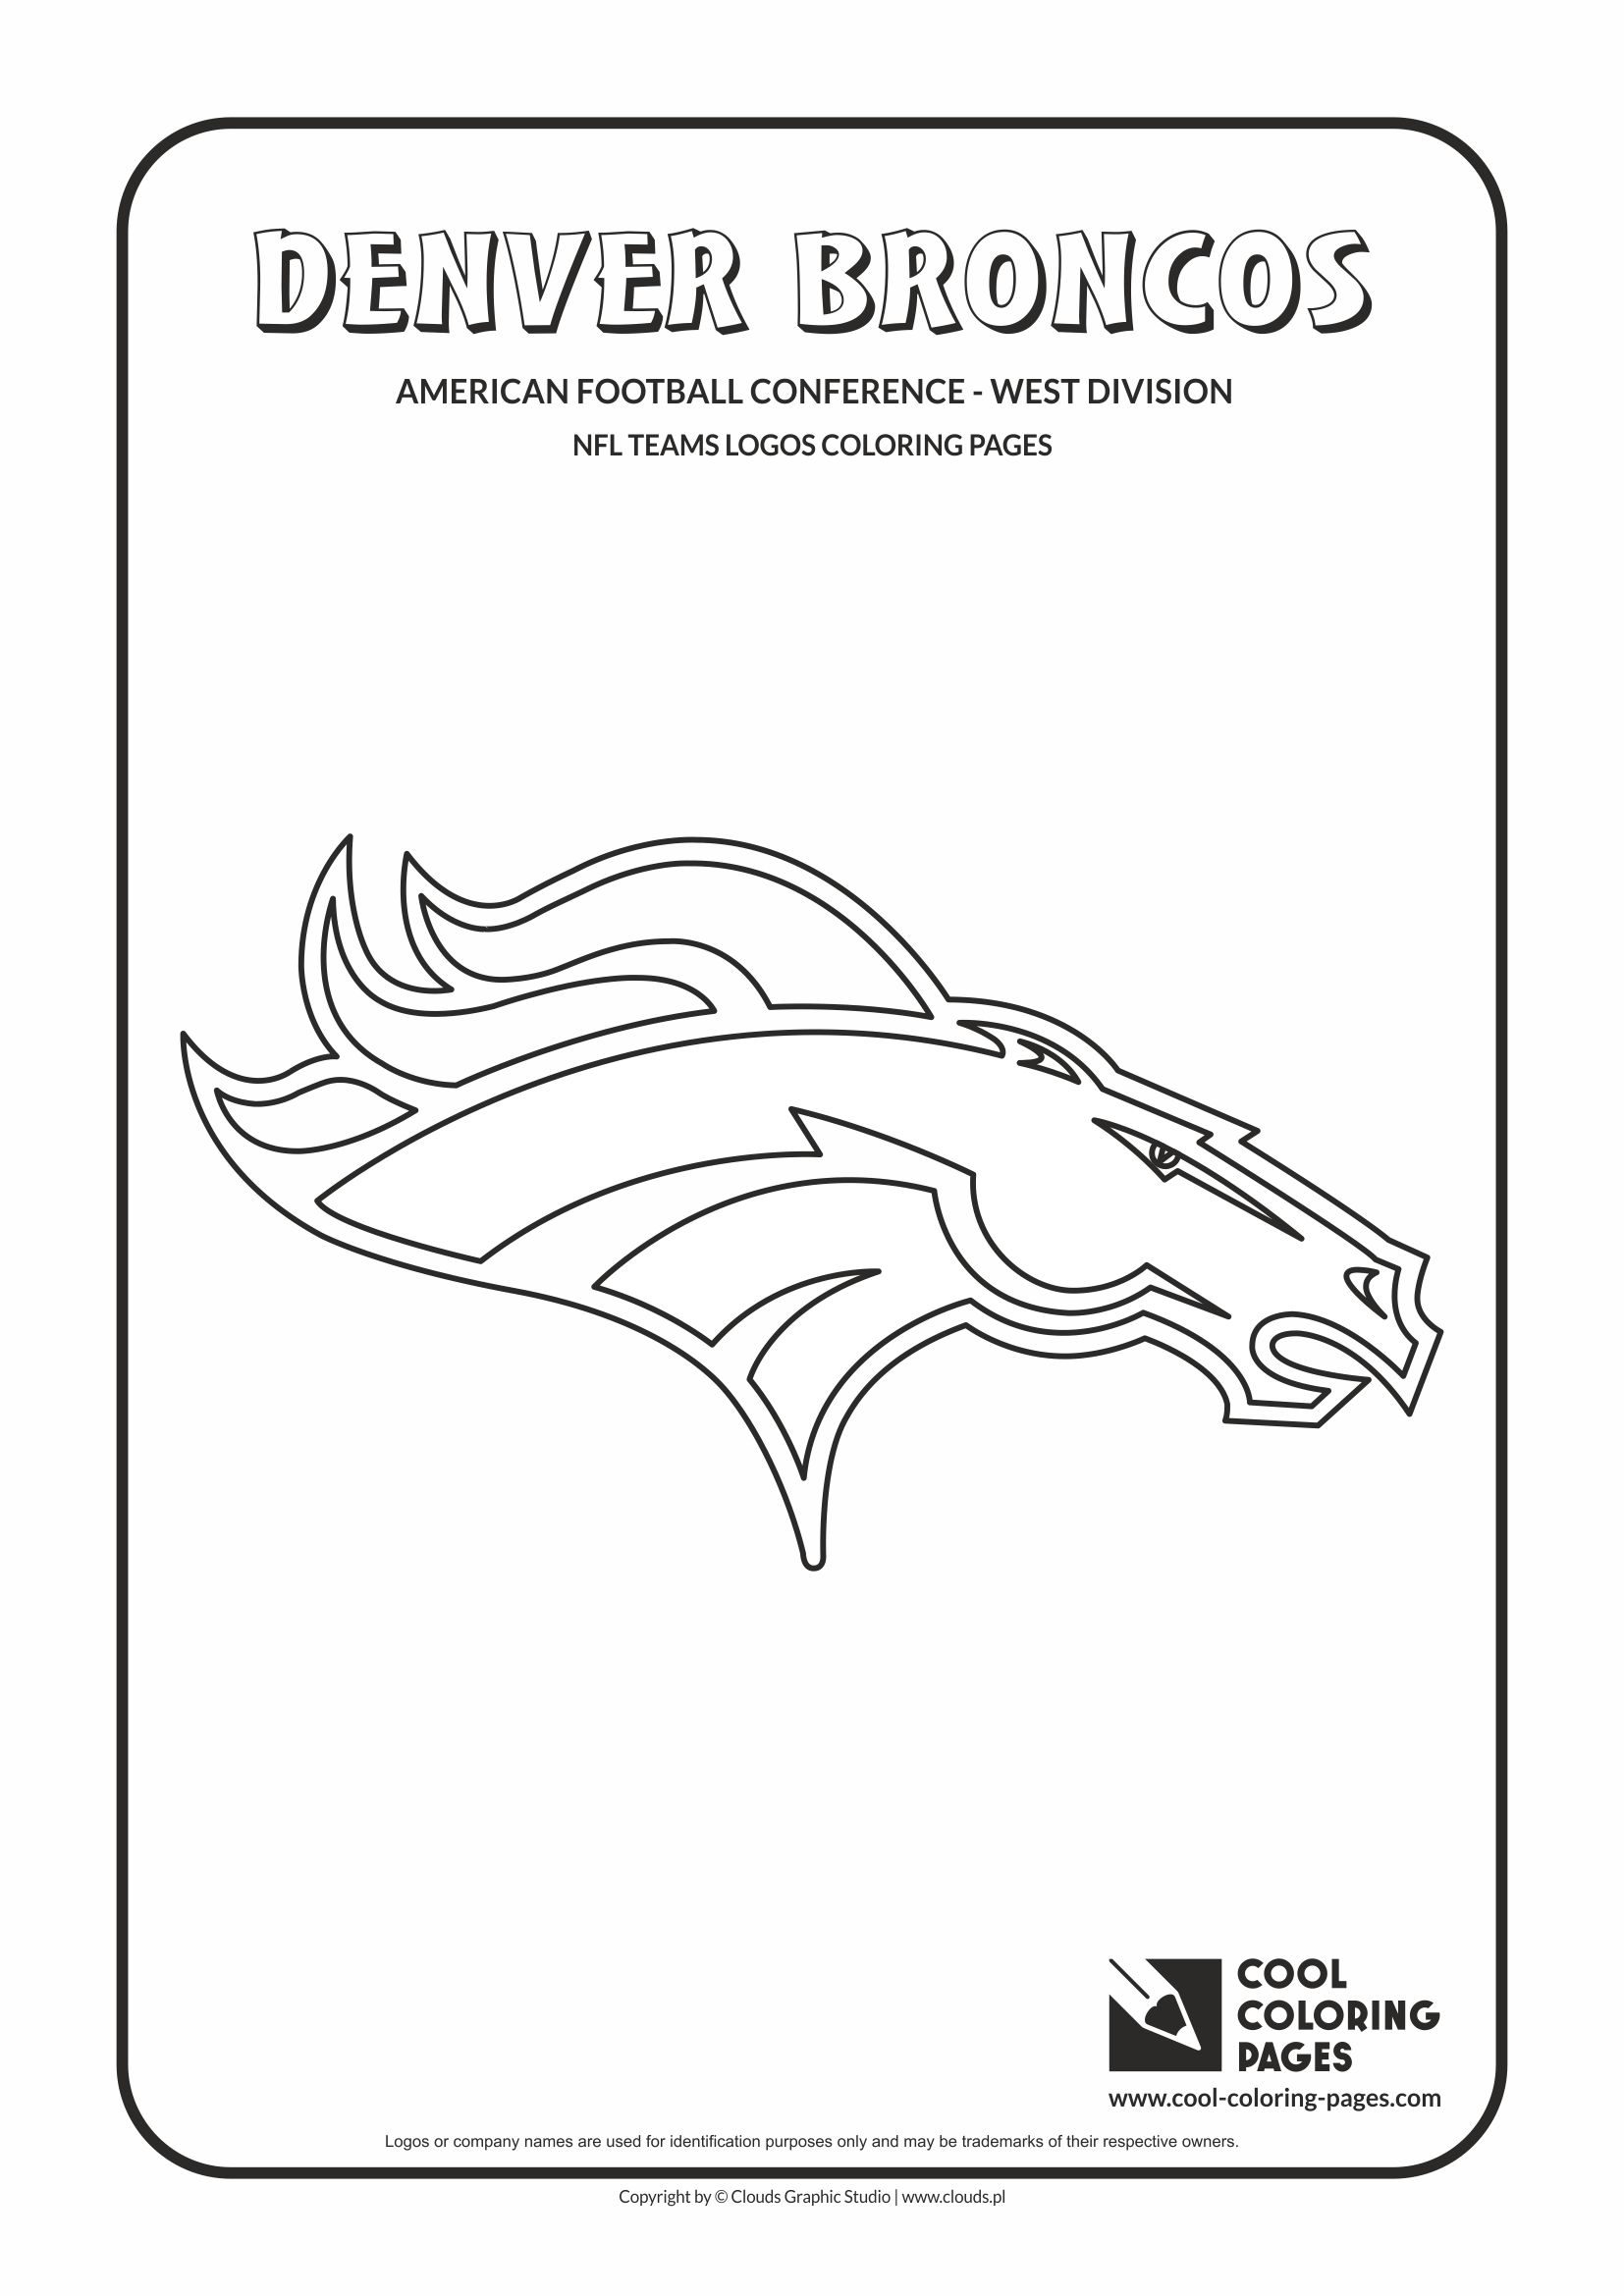 Cool Coloring Pages - NFL American Football Clubs Logos - American Football Conference - West Division / Denver Broncos logo / Coloring page with Denver Broncos logo